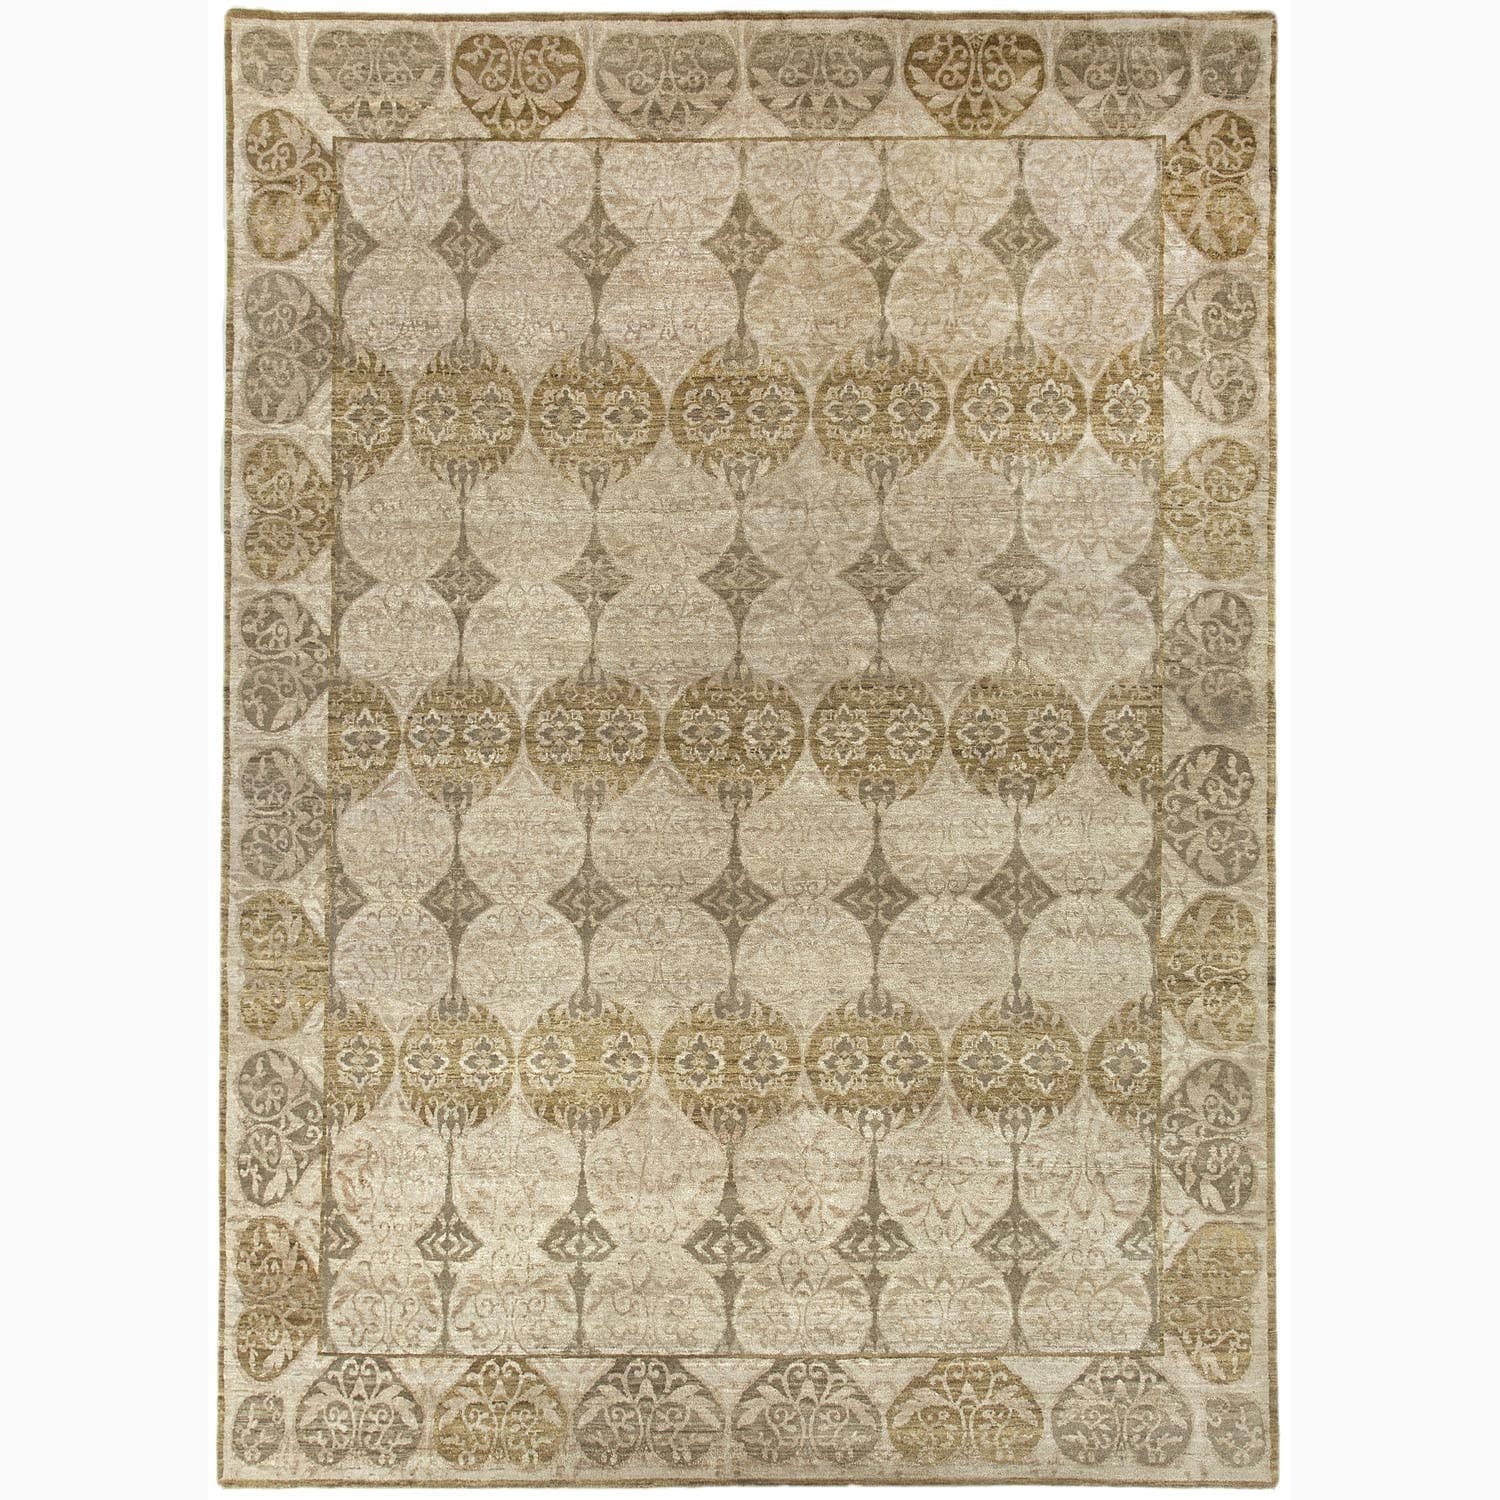 Hand made Abstract Pattern Ivory/ Taupe Wool Rug (6x9)